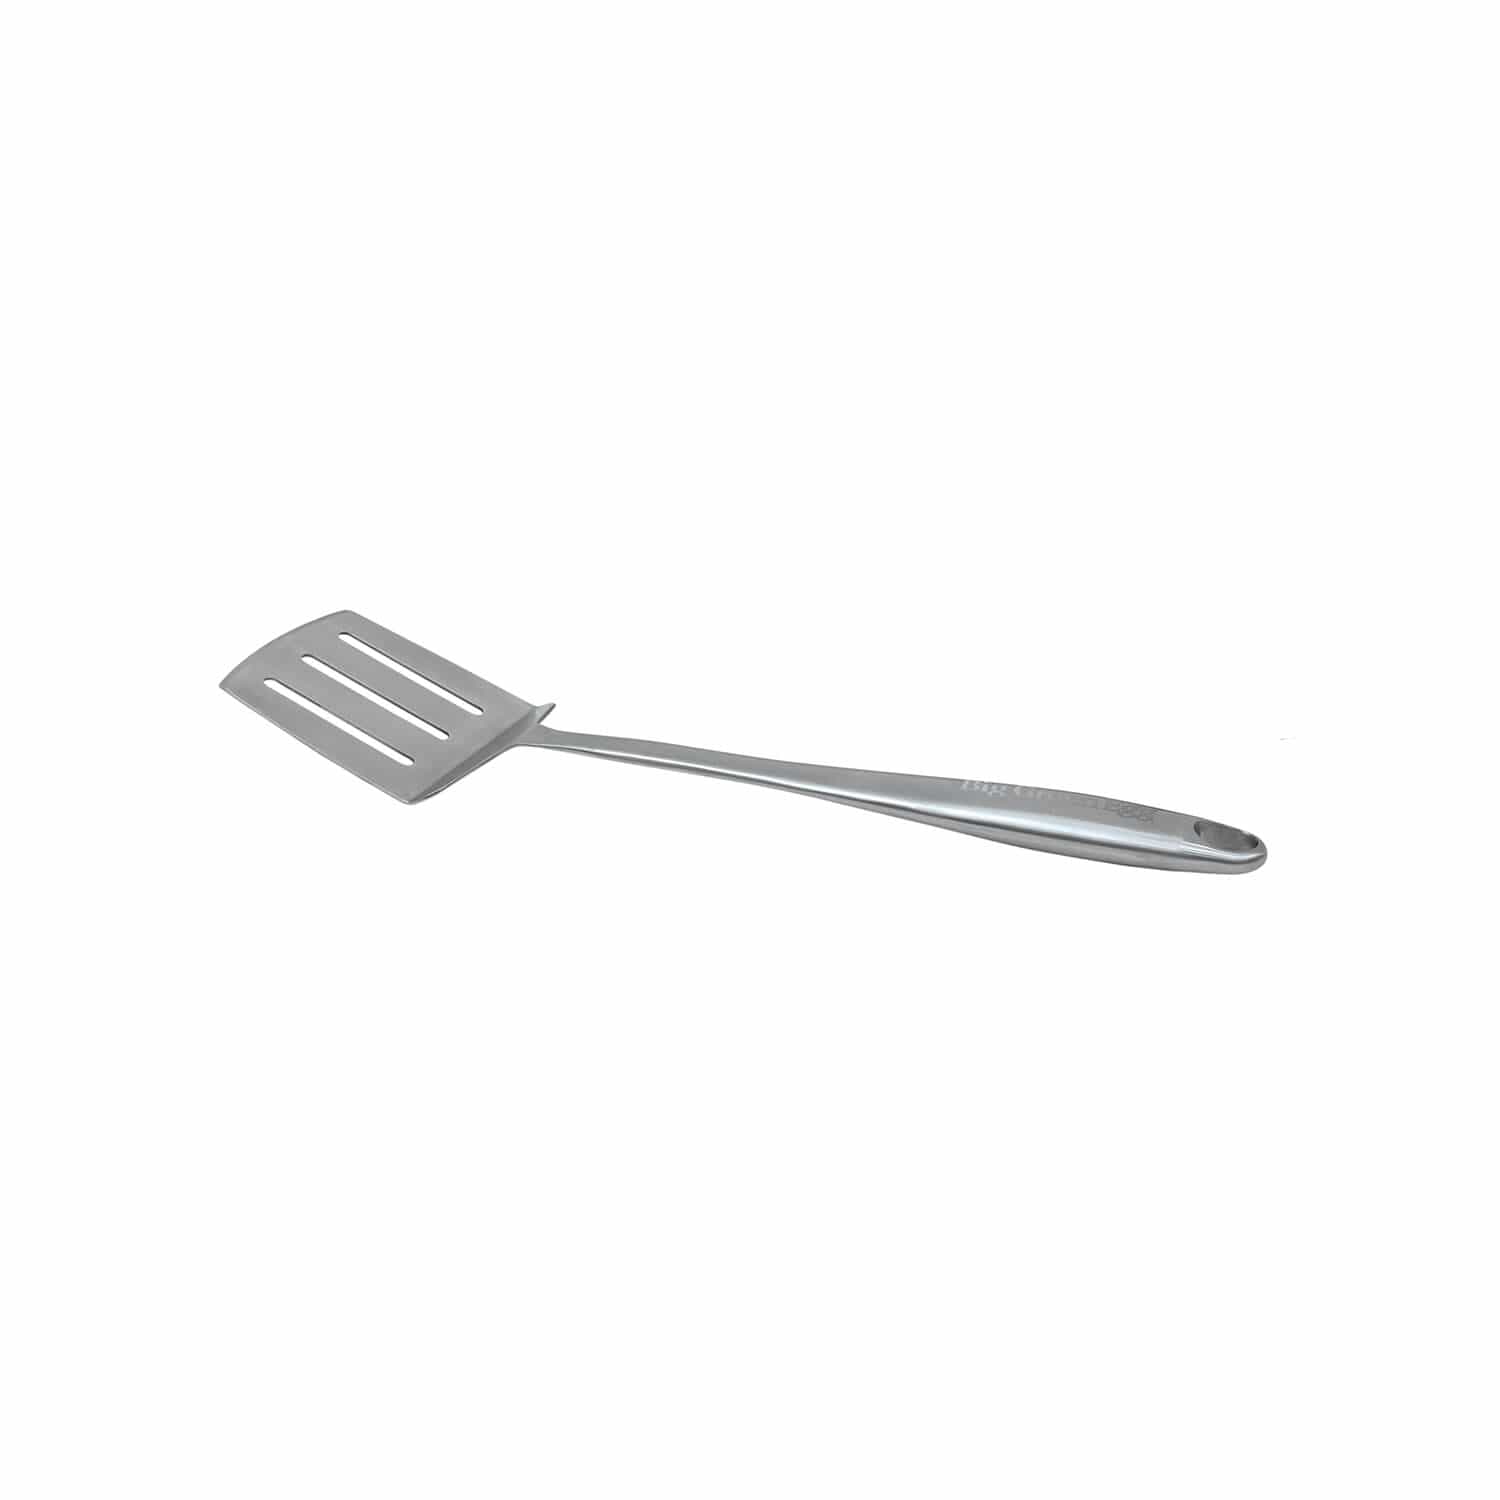 Big Green Egg Barbeque Stainless Steel Spatula